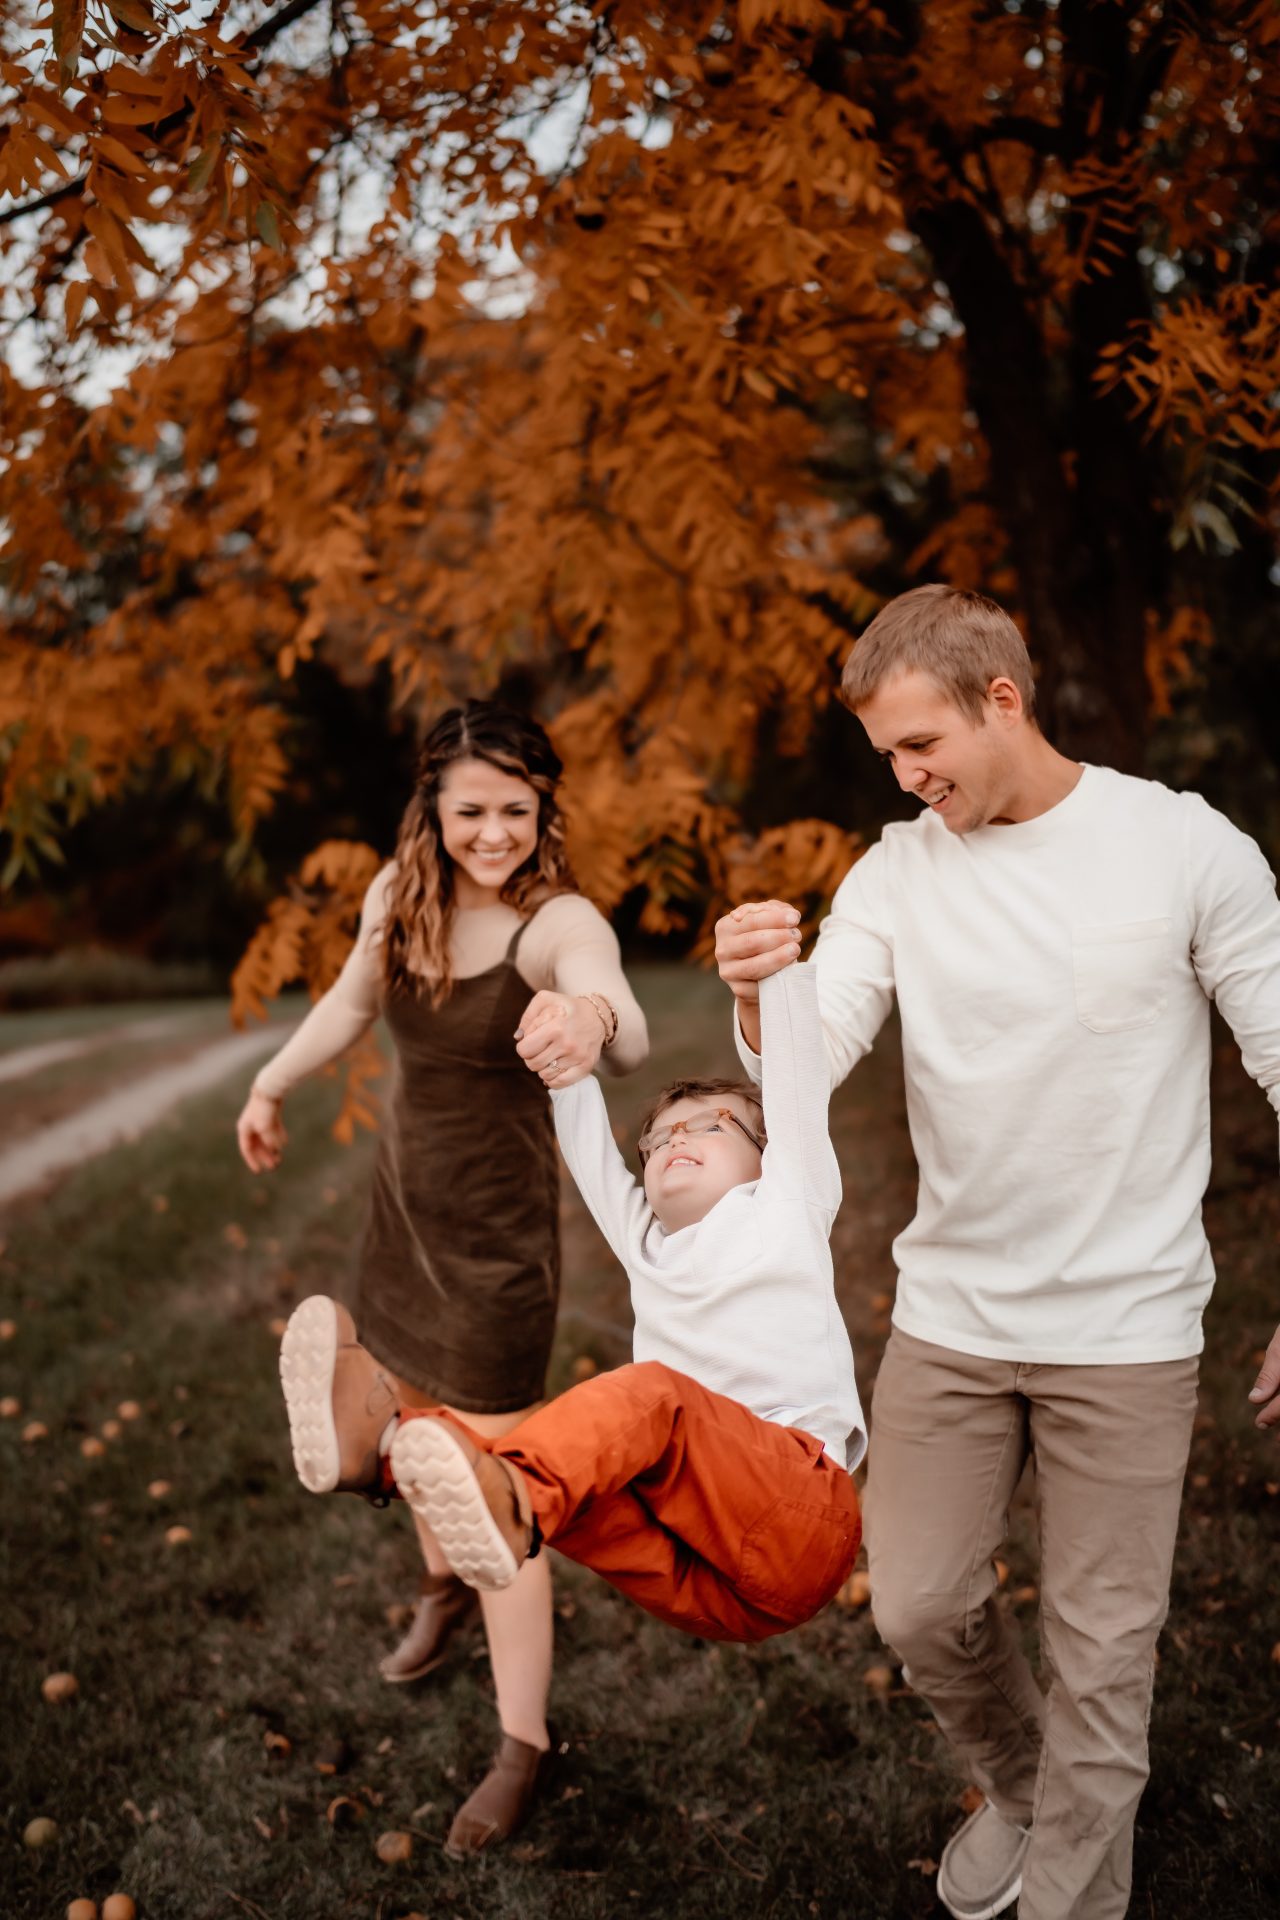 A happy moment as a young family cherishes inclusion, with the parents playfully swinging their deaf child by the arms amidst a backdrop of golden fall foliage, reminiscent of a scene from a children's book